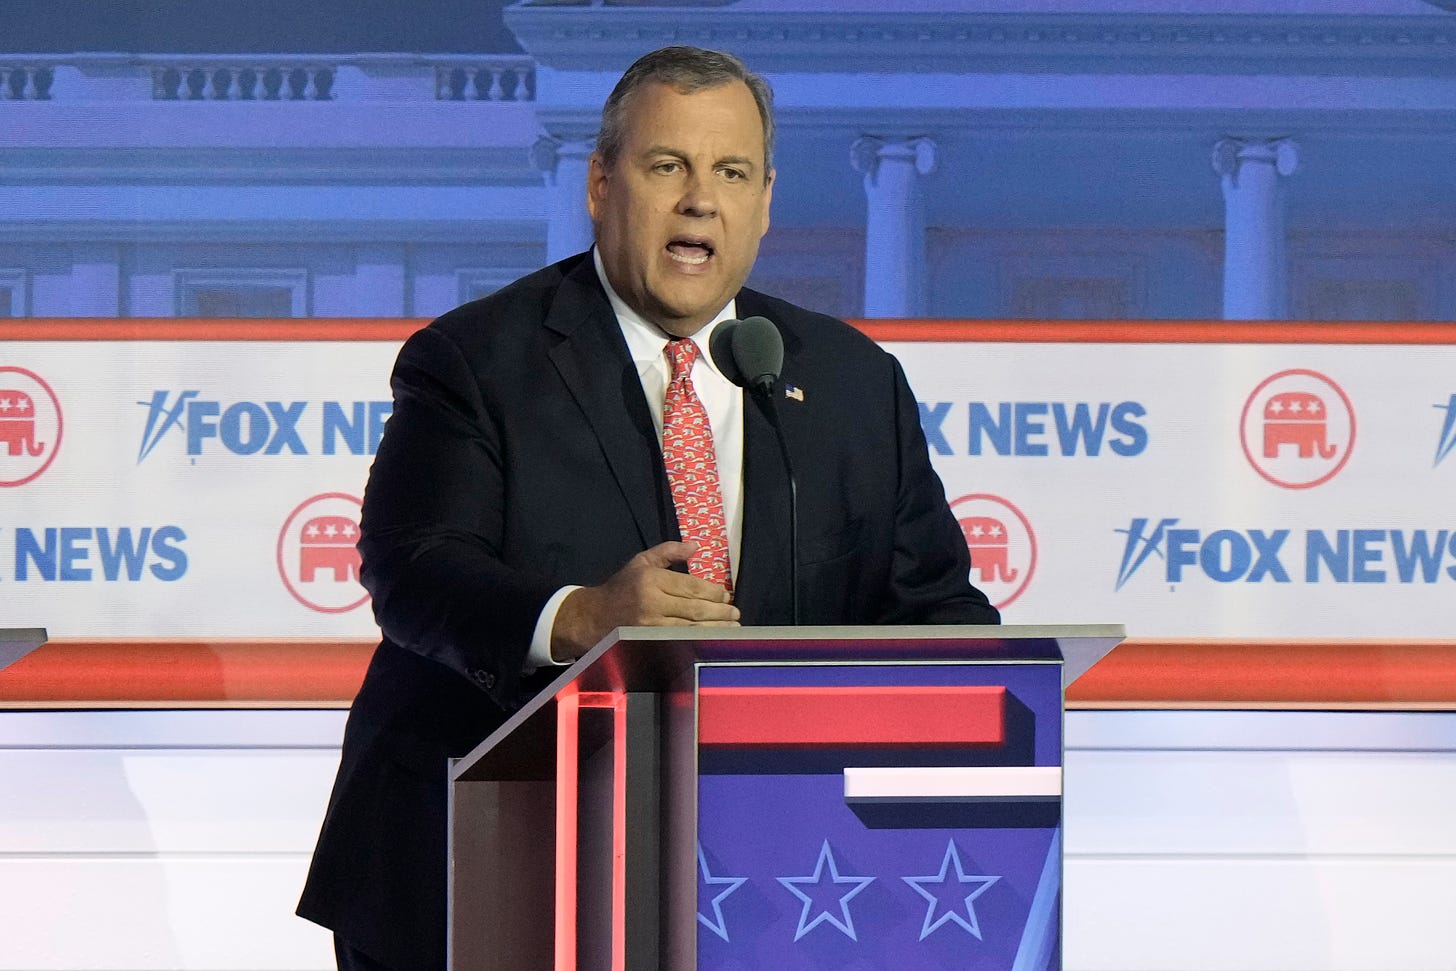 Chris Christie showered with boos during Republican presidential debate